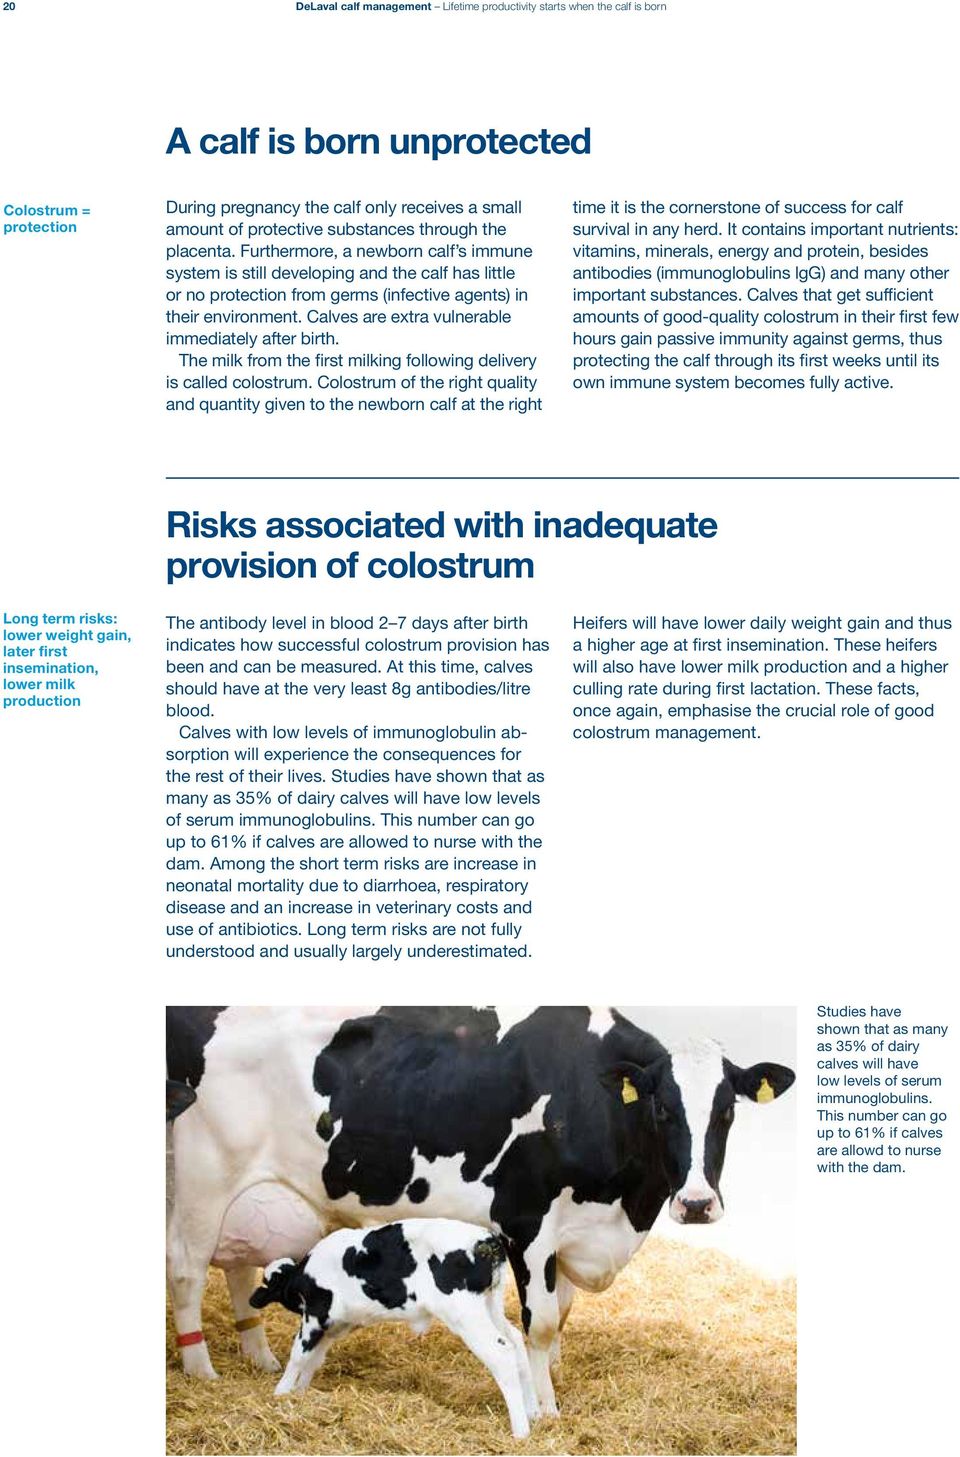 Calves are extra vulnerable immediately after birth. The milk from the first milking following delivery is called colostrum.